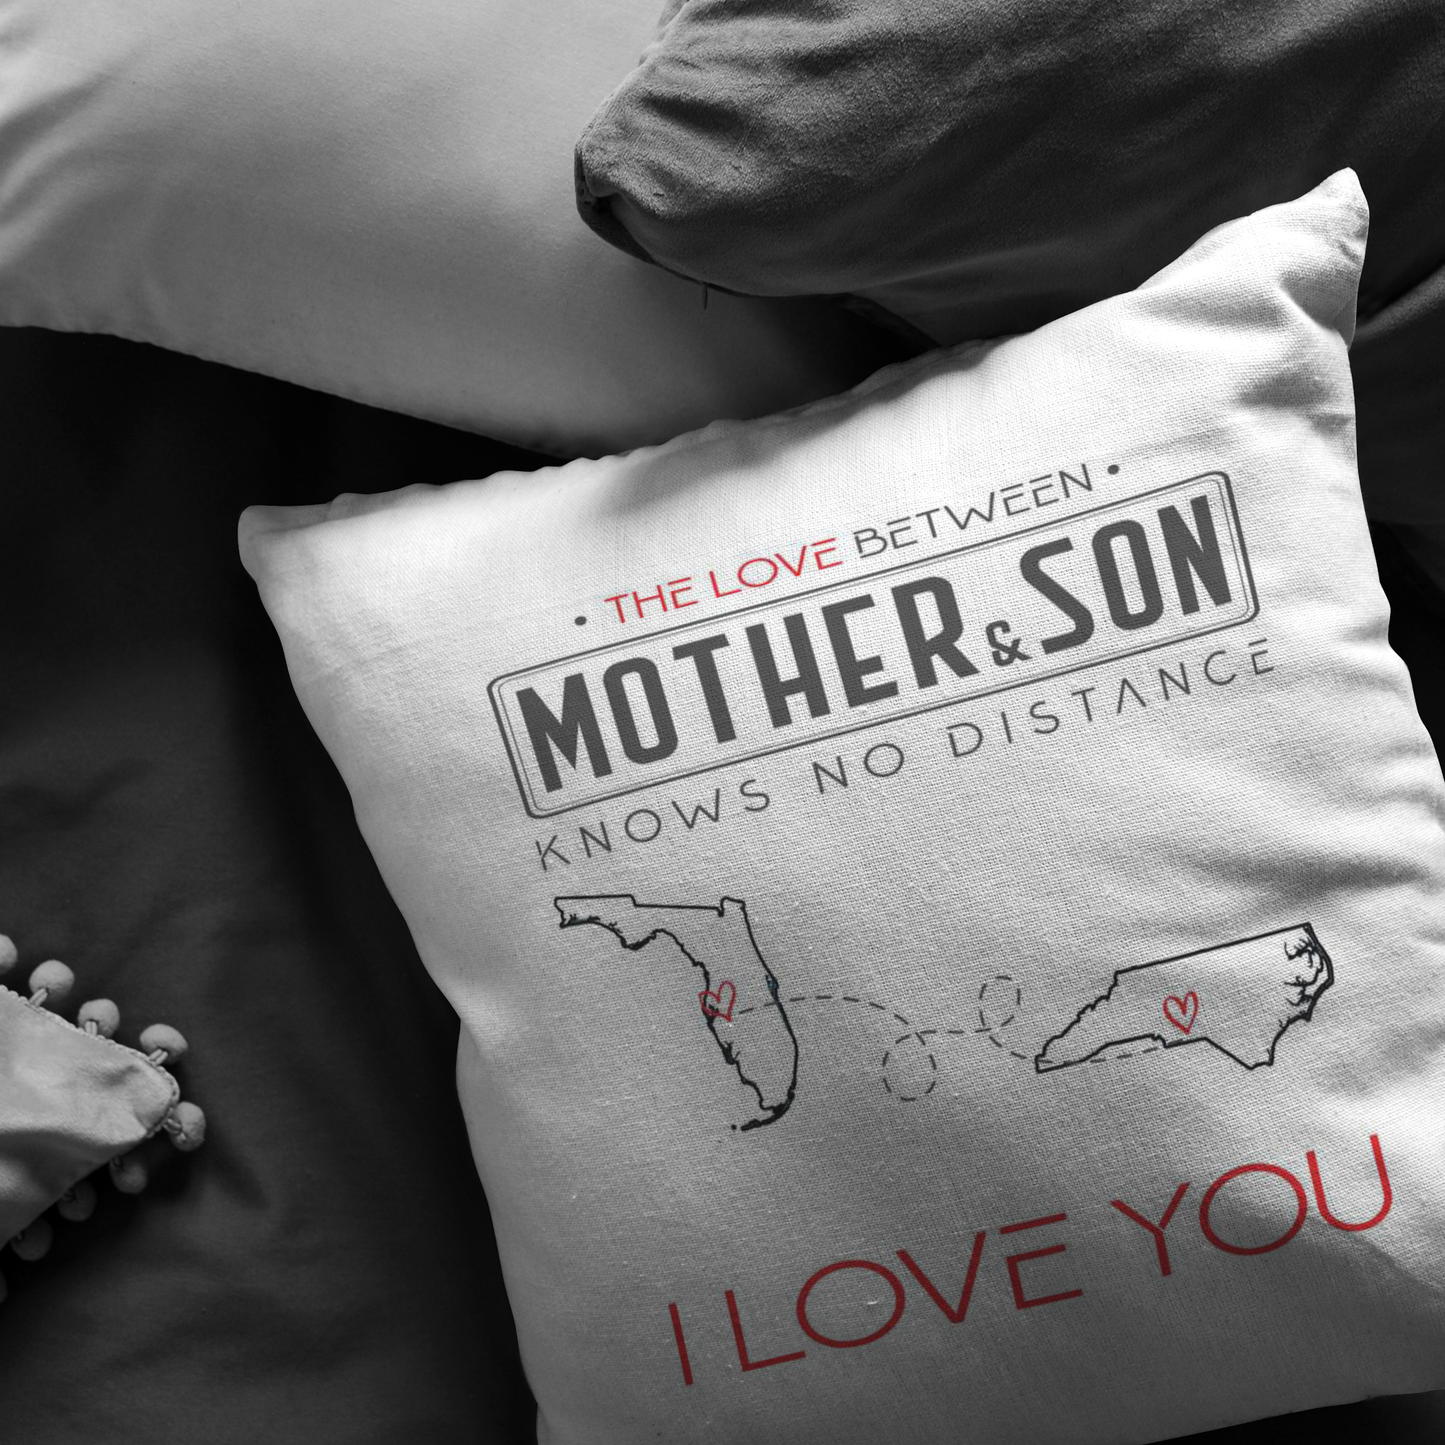 ND-pl20419710-sp-23260 - Mothers Day Gifts For Mom - The Love Between Mother  Son K